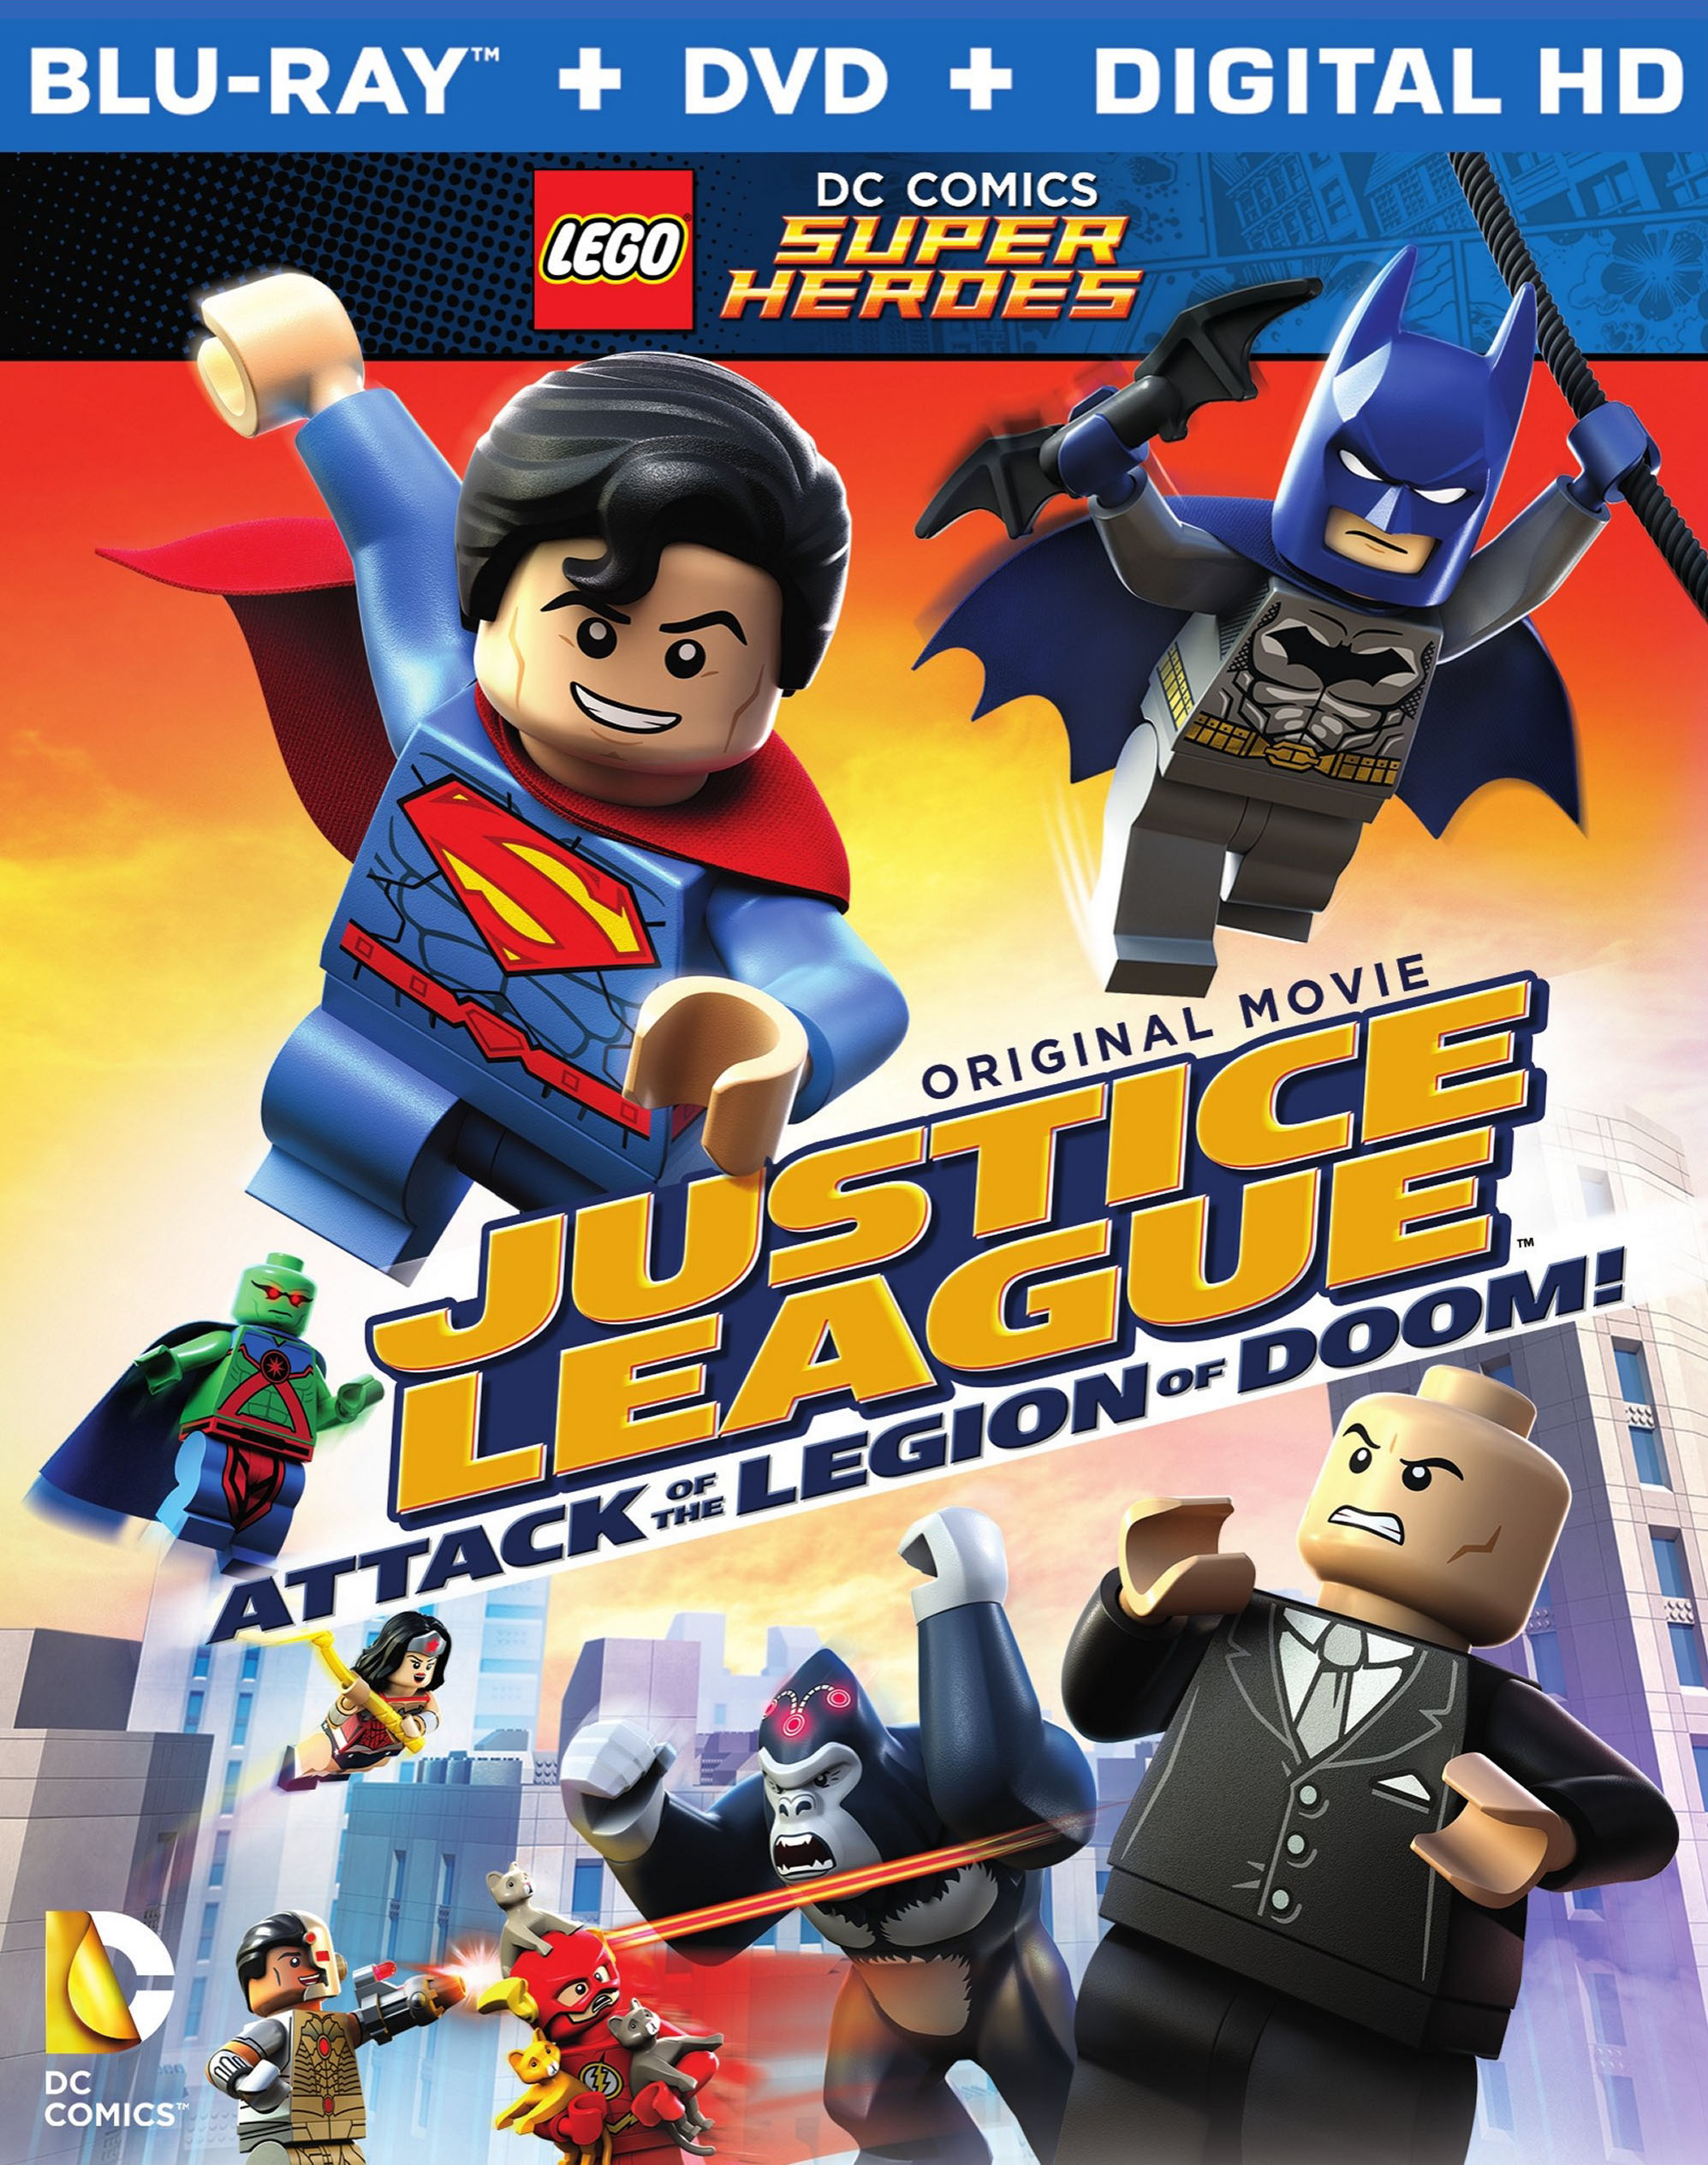 talsmand psykologi justere LEGO DC Comics Super Heroes: Justice League Attack of the Legion of Doom  [Blu-ray/DVD] - Best Buy